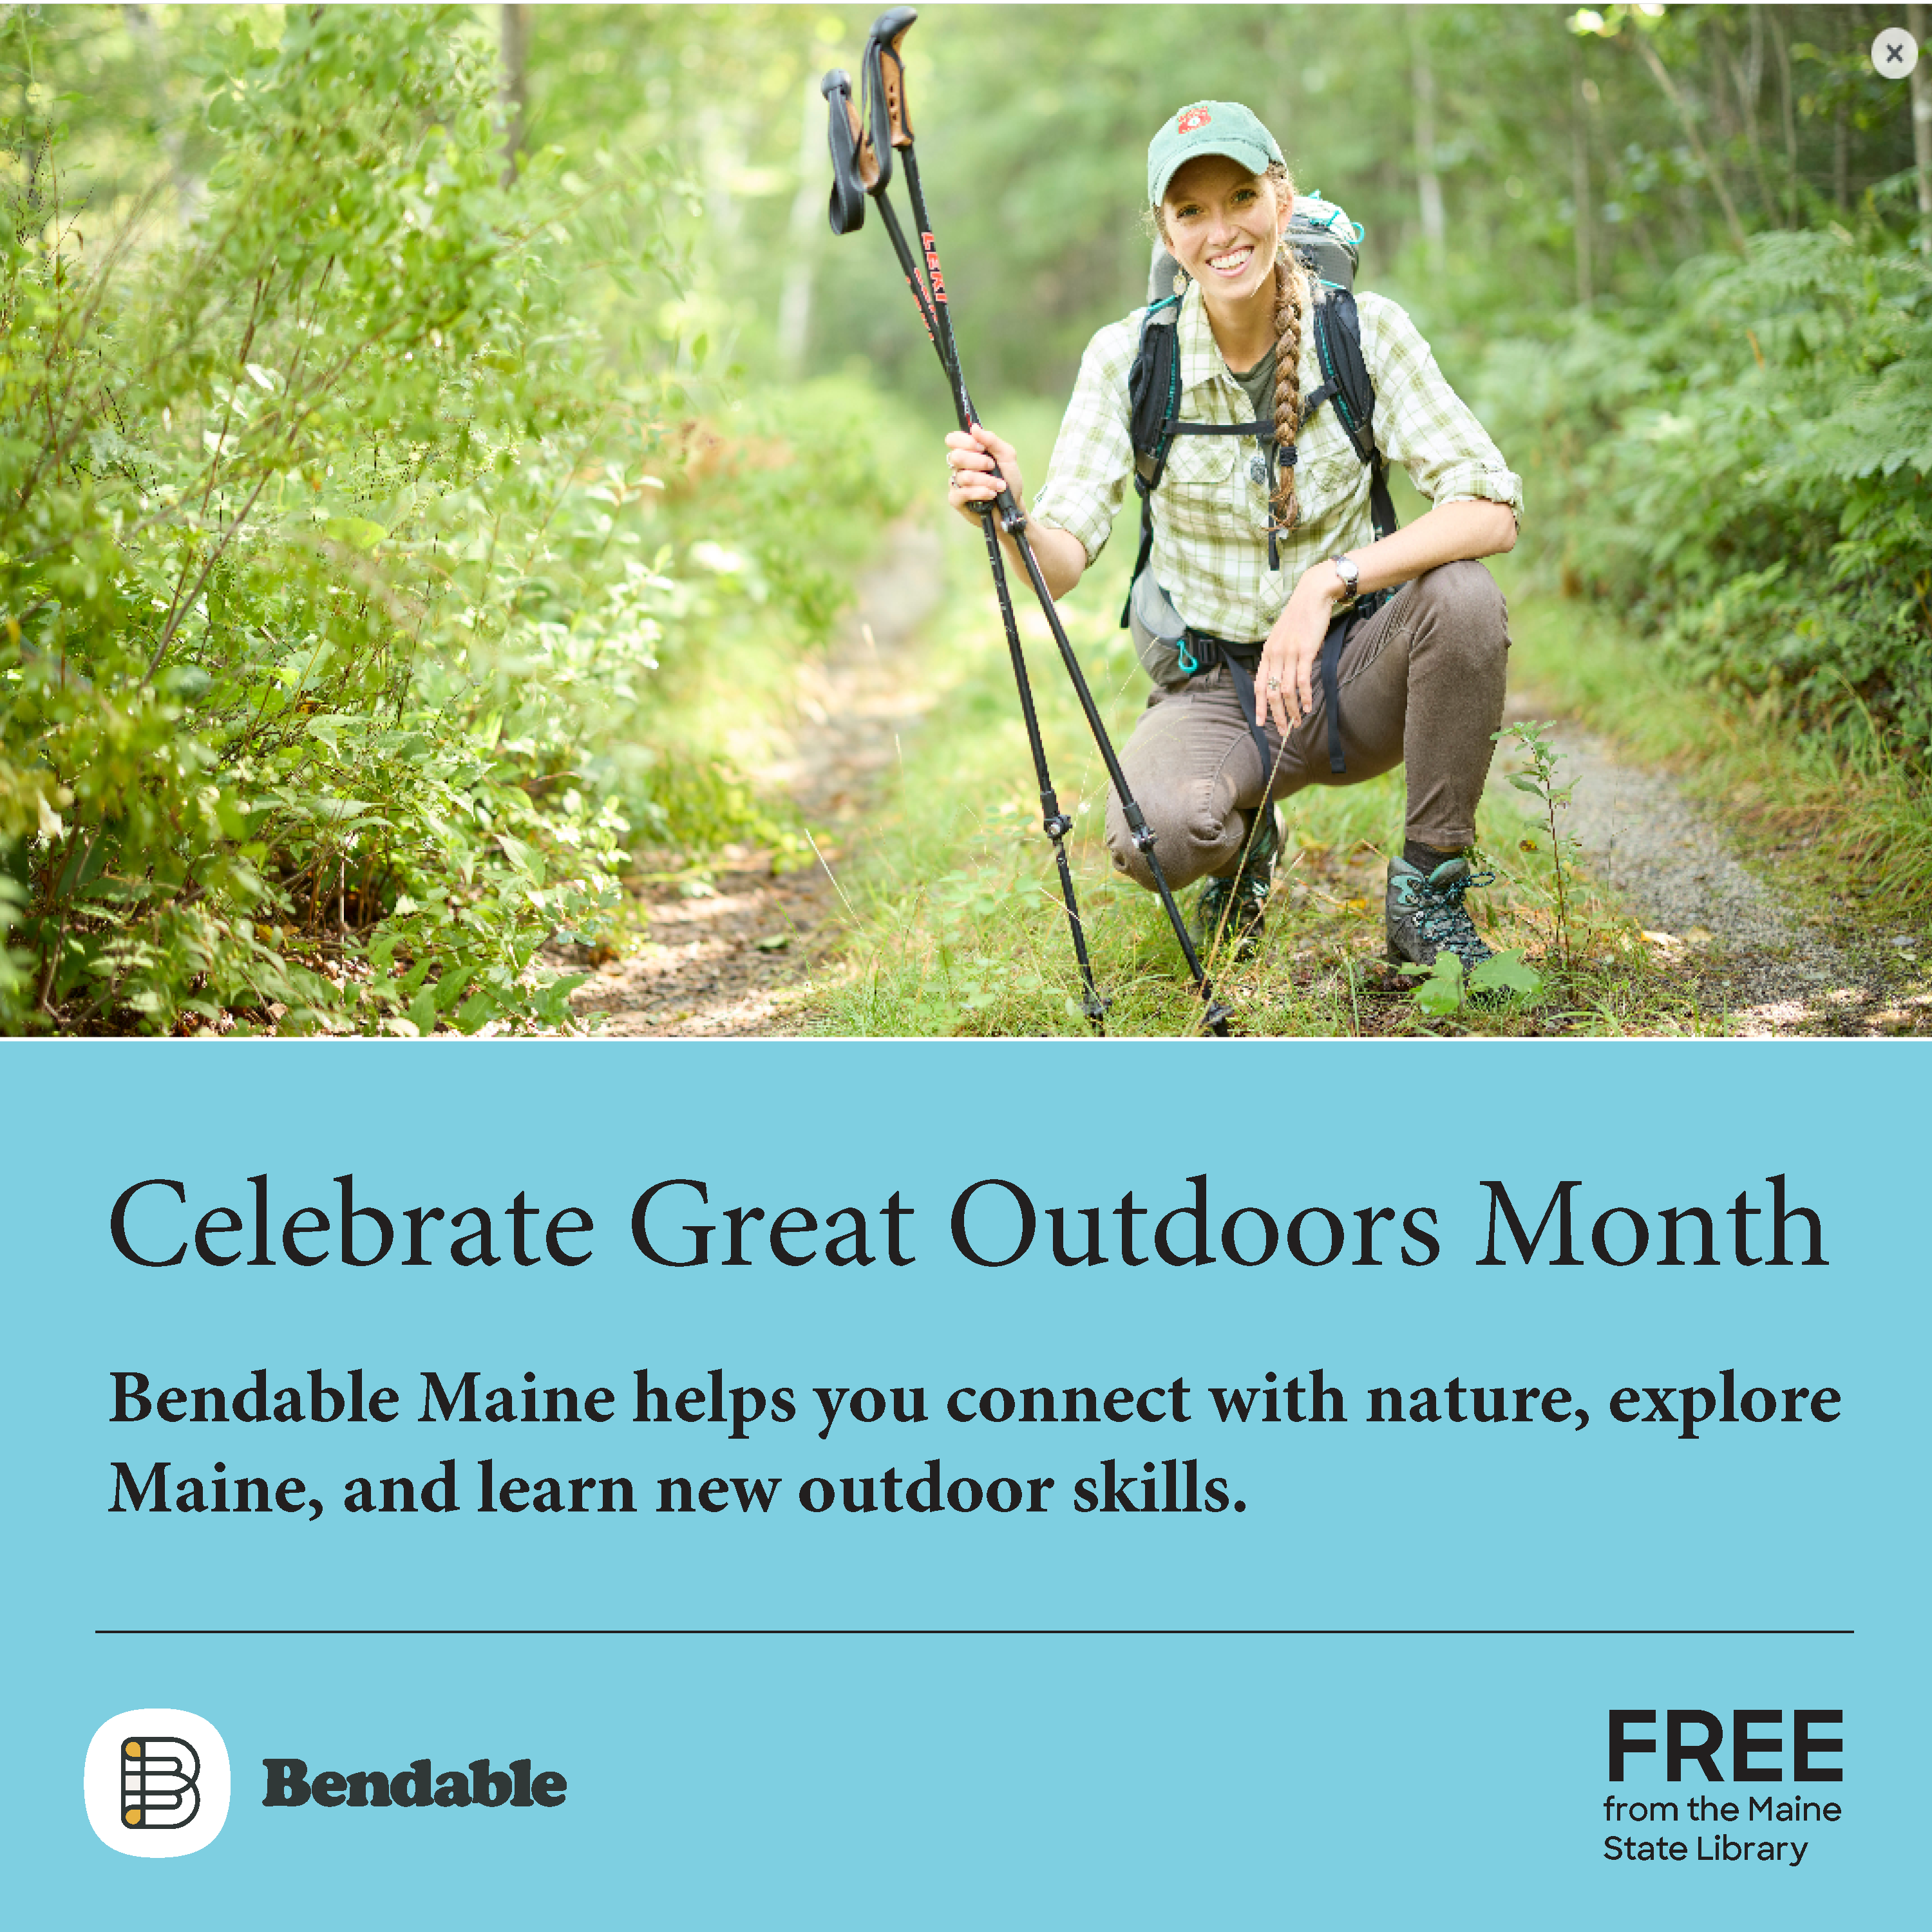 Bendable Resources for Maine Summers